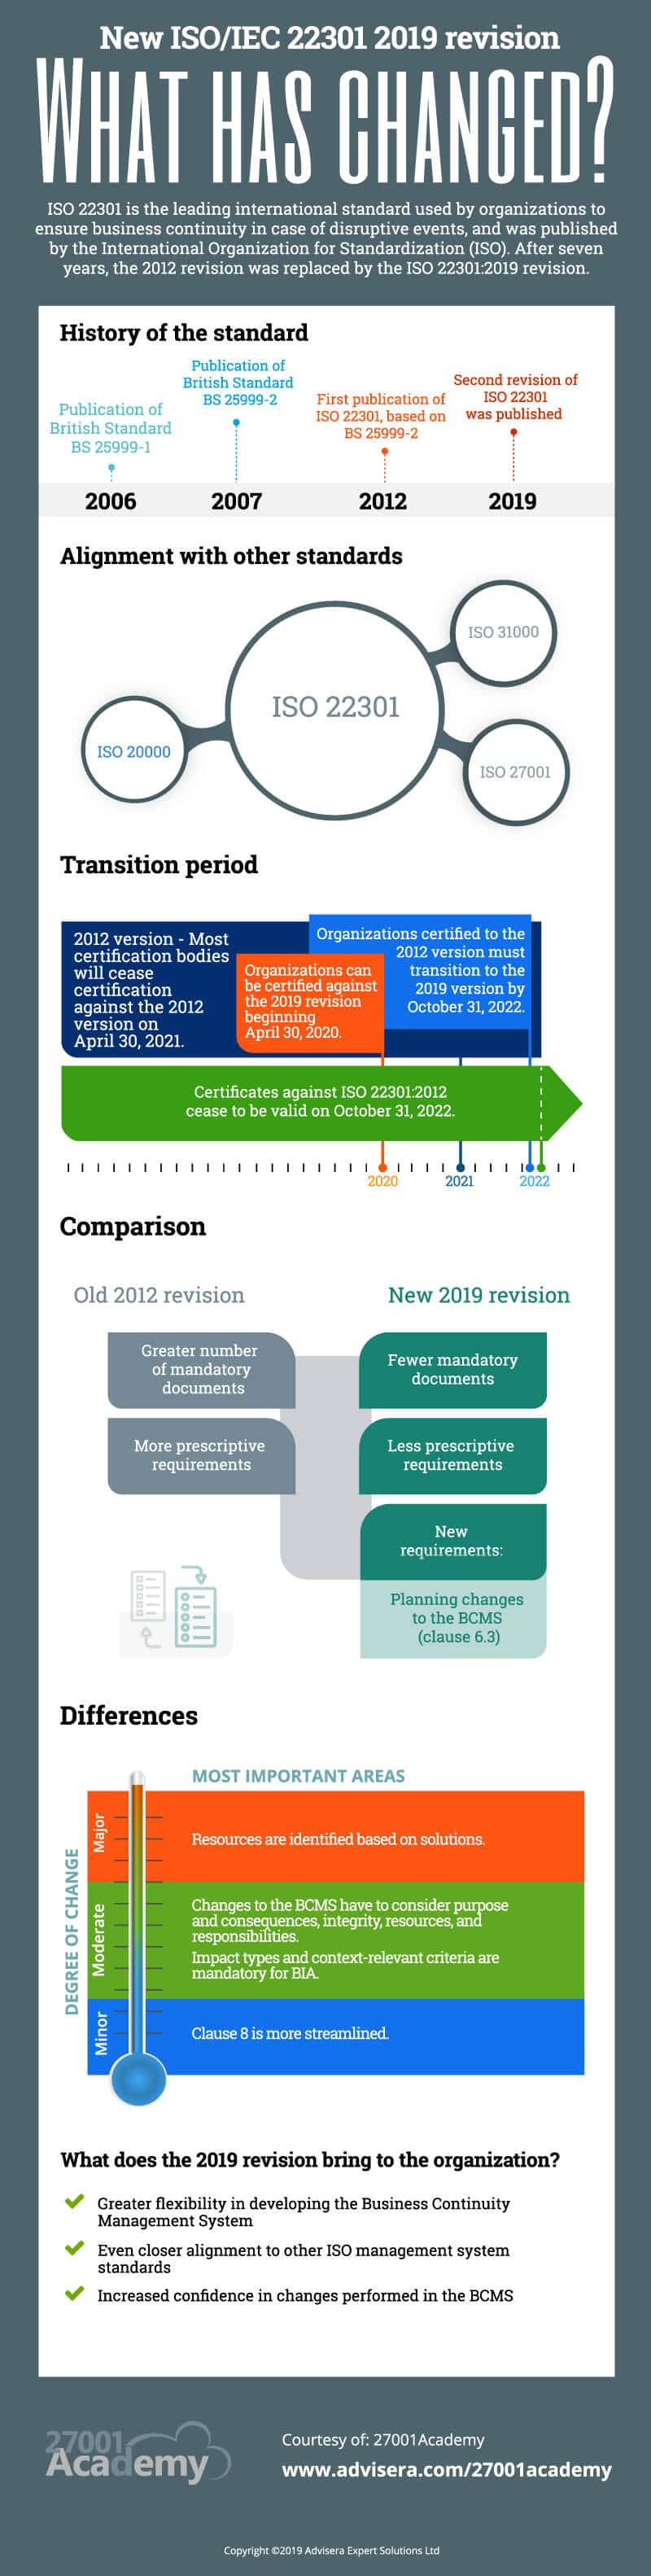 Infographic: ISO 22301:2012 vs. ISO 22301:2019 revision – What has changed?